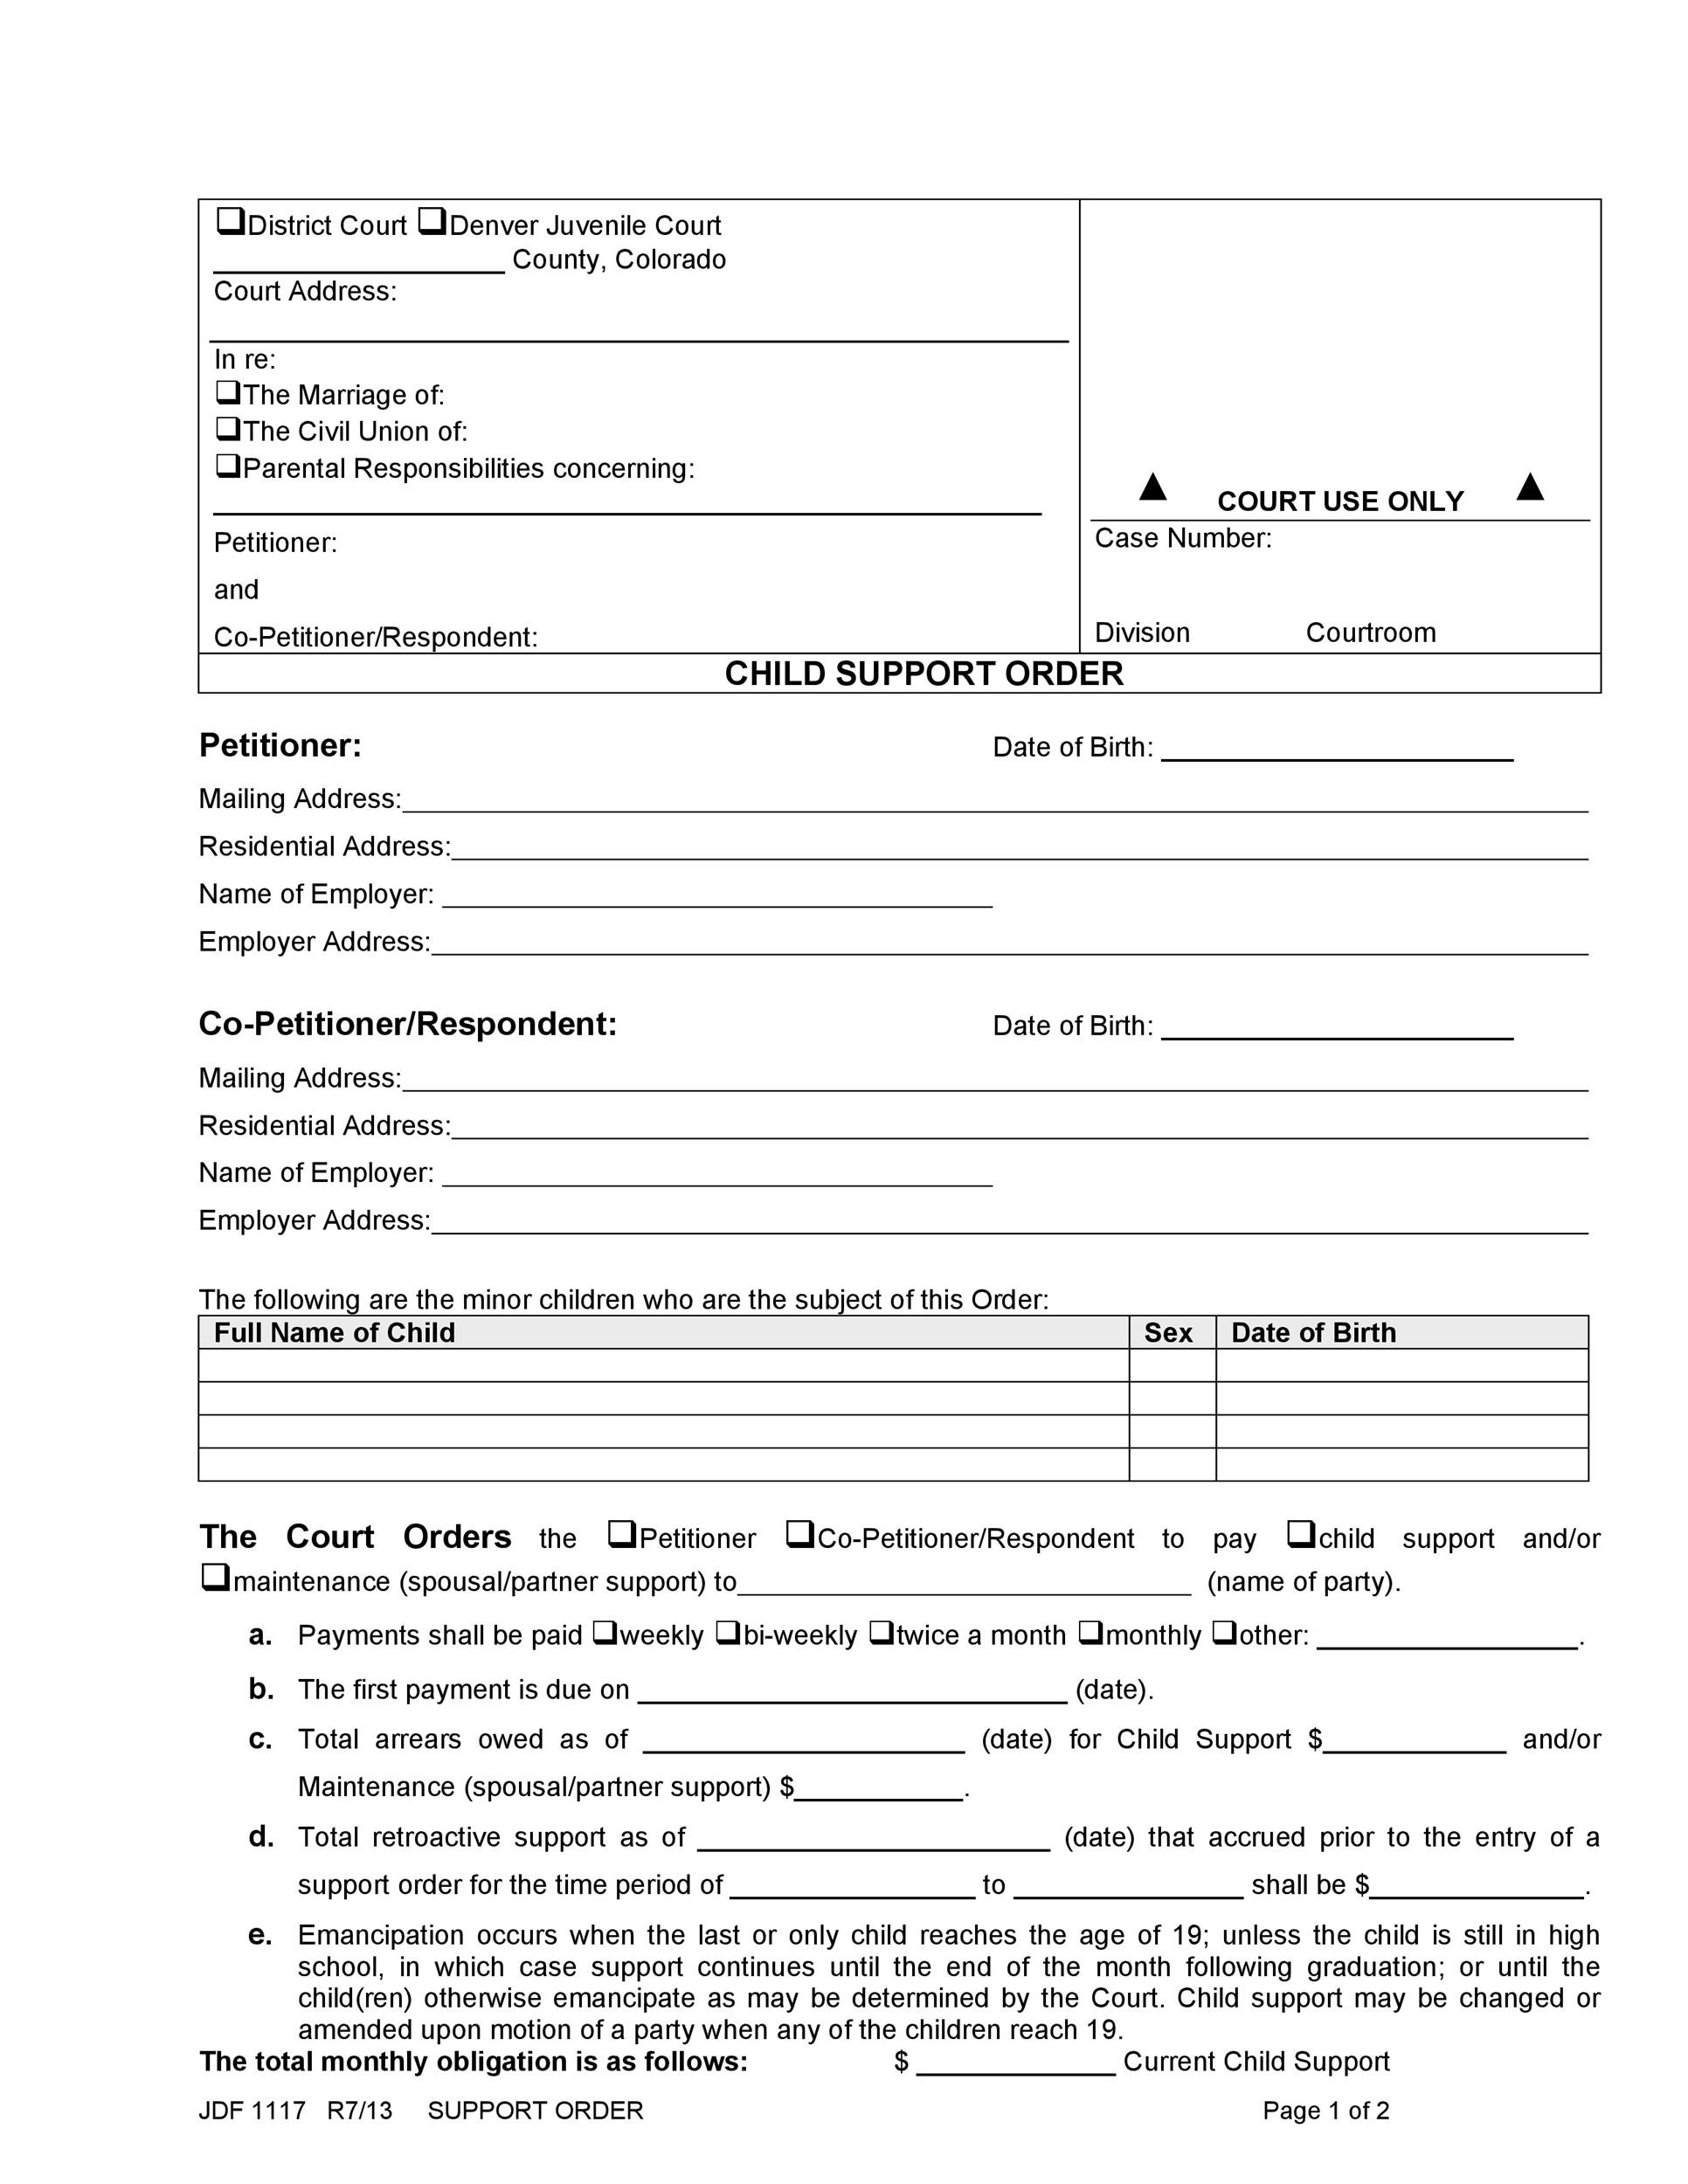 Free child support agreement 31